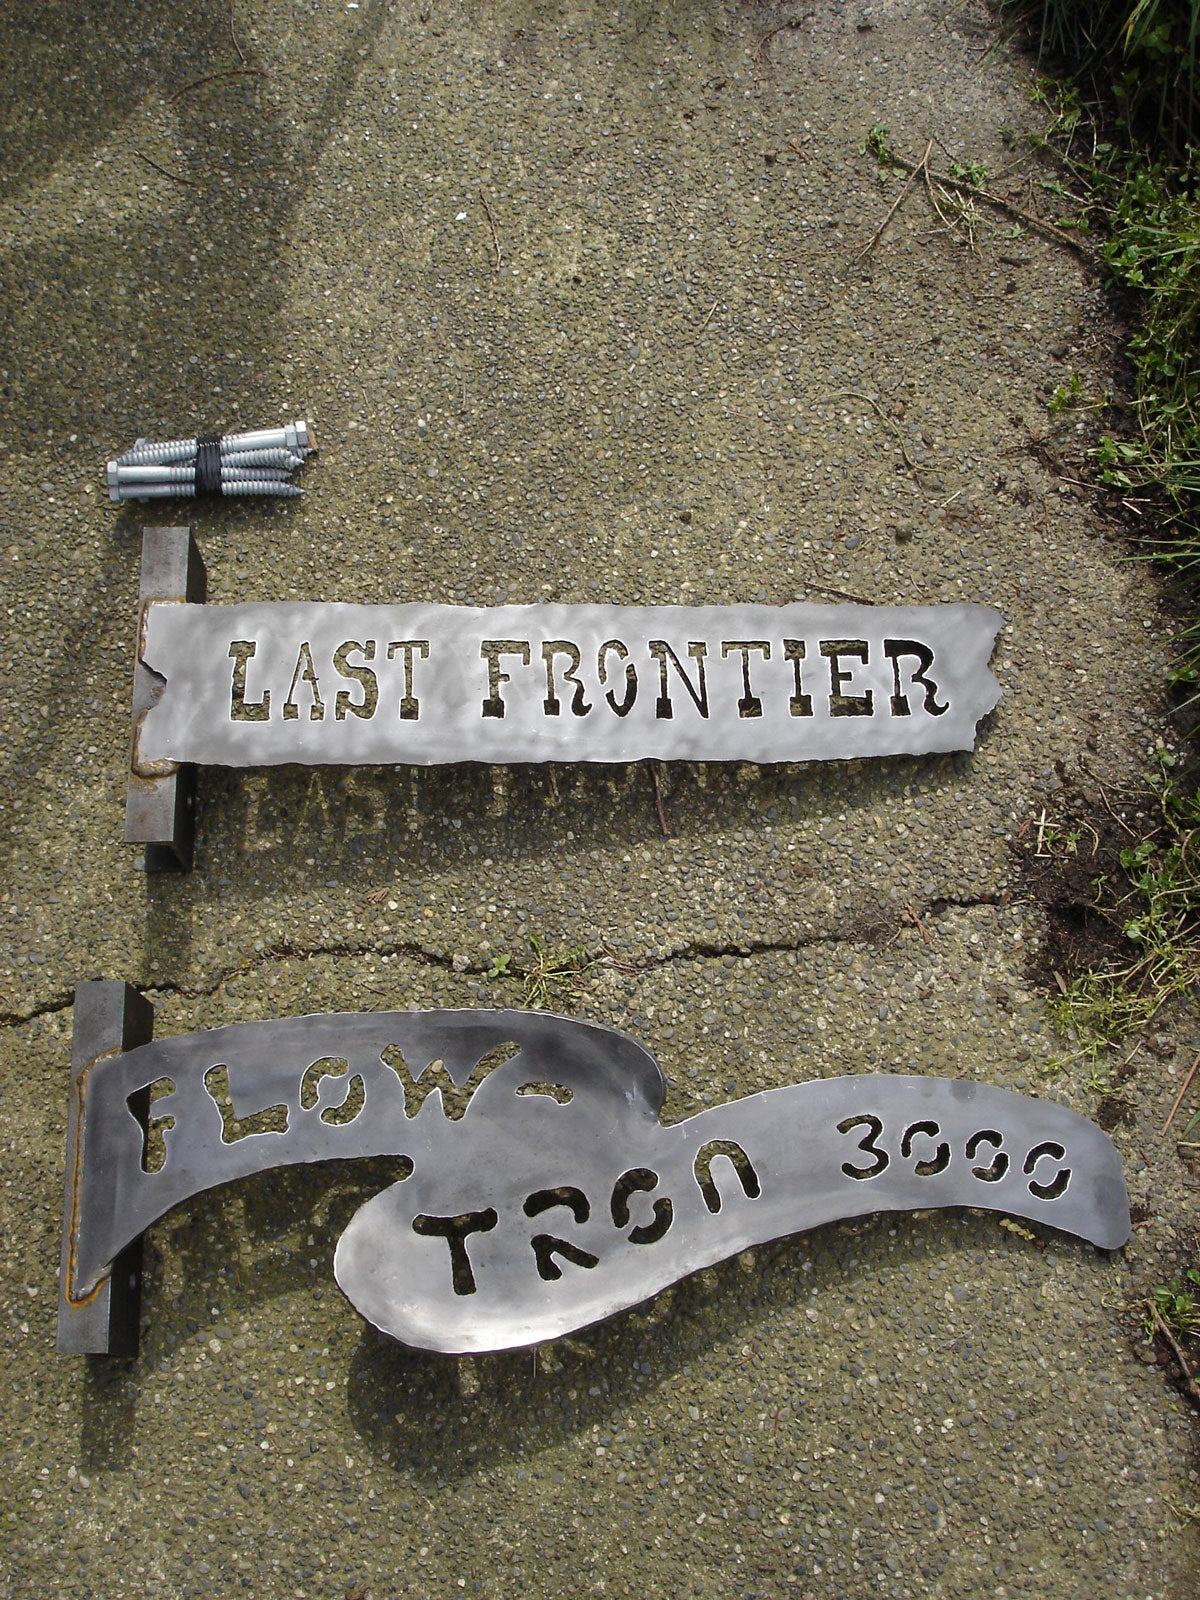 Last Frontier & Flowtron 3000 signs - Tokul